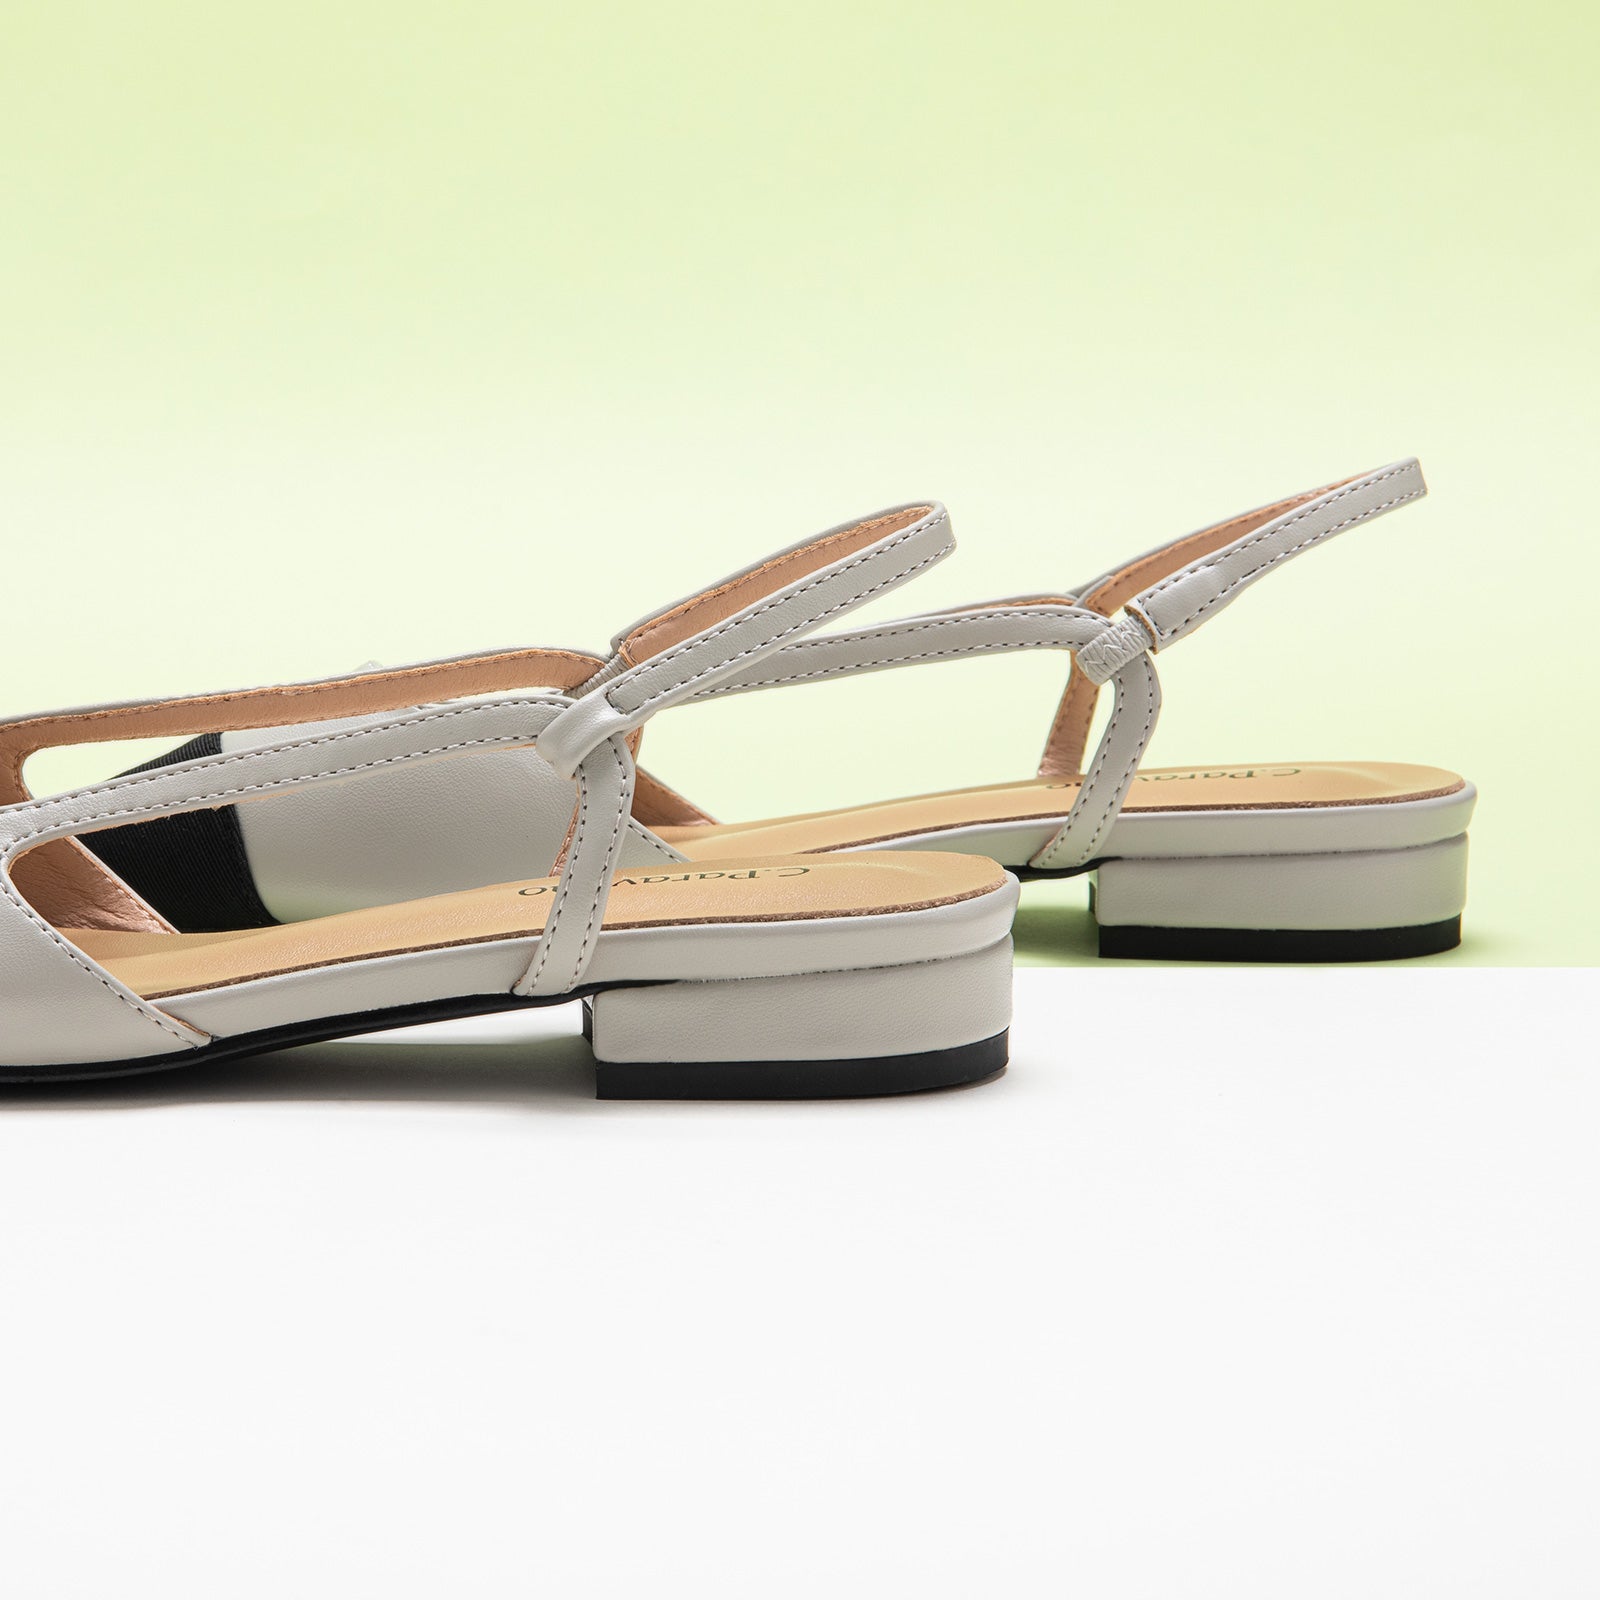 Grey Slingback Flats with a pointed toe, offering a chic and understated option for everyday elegance